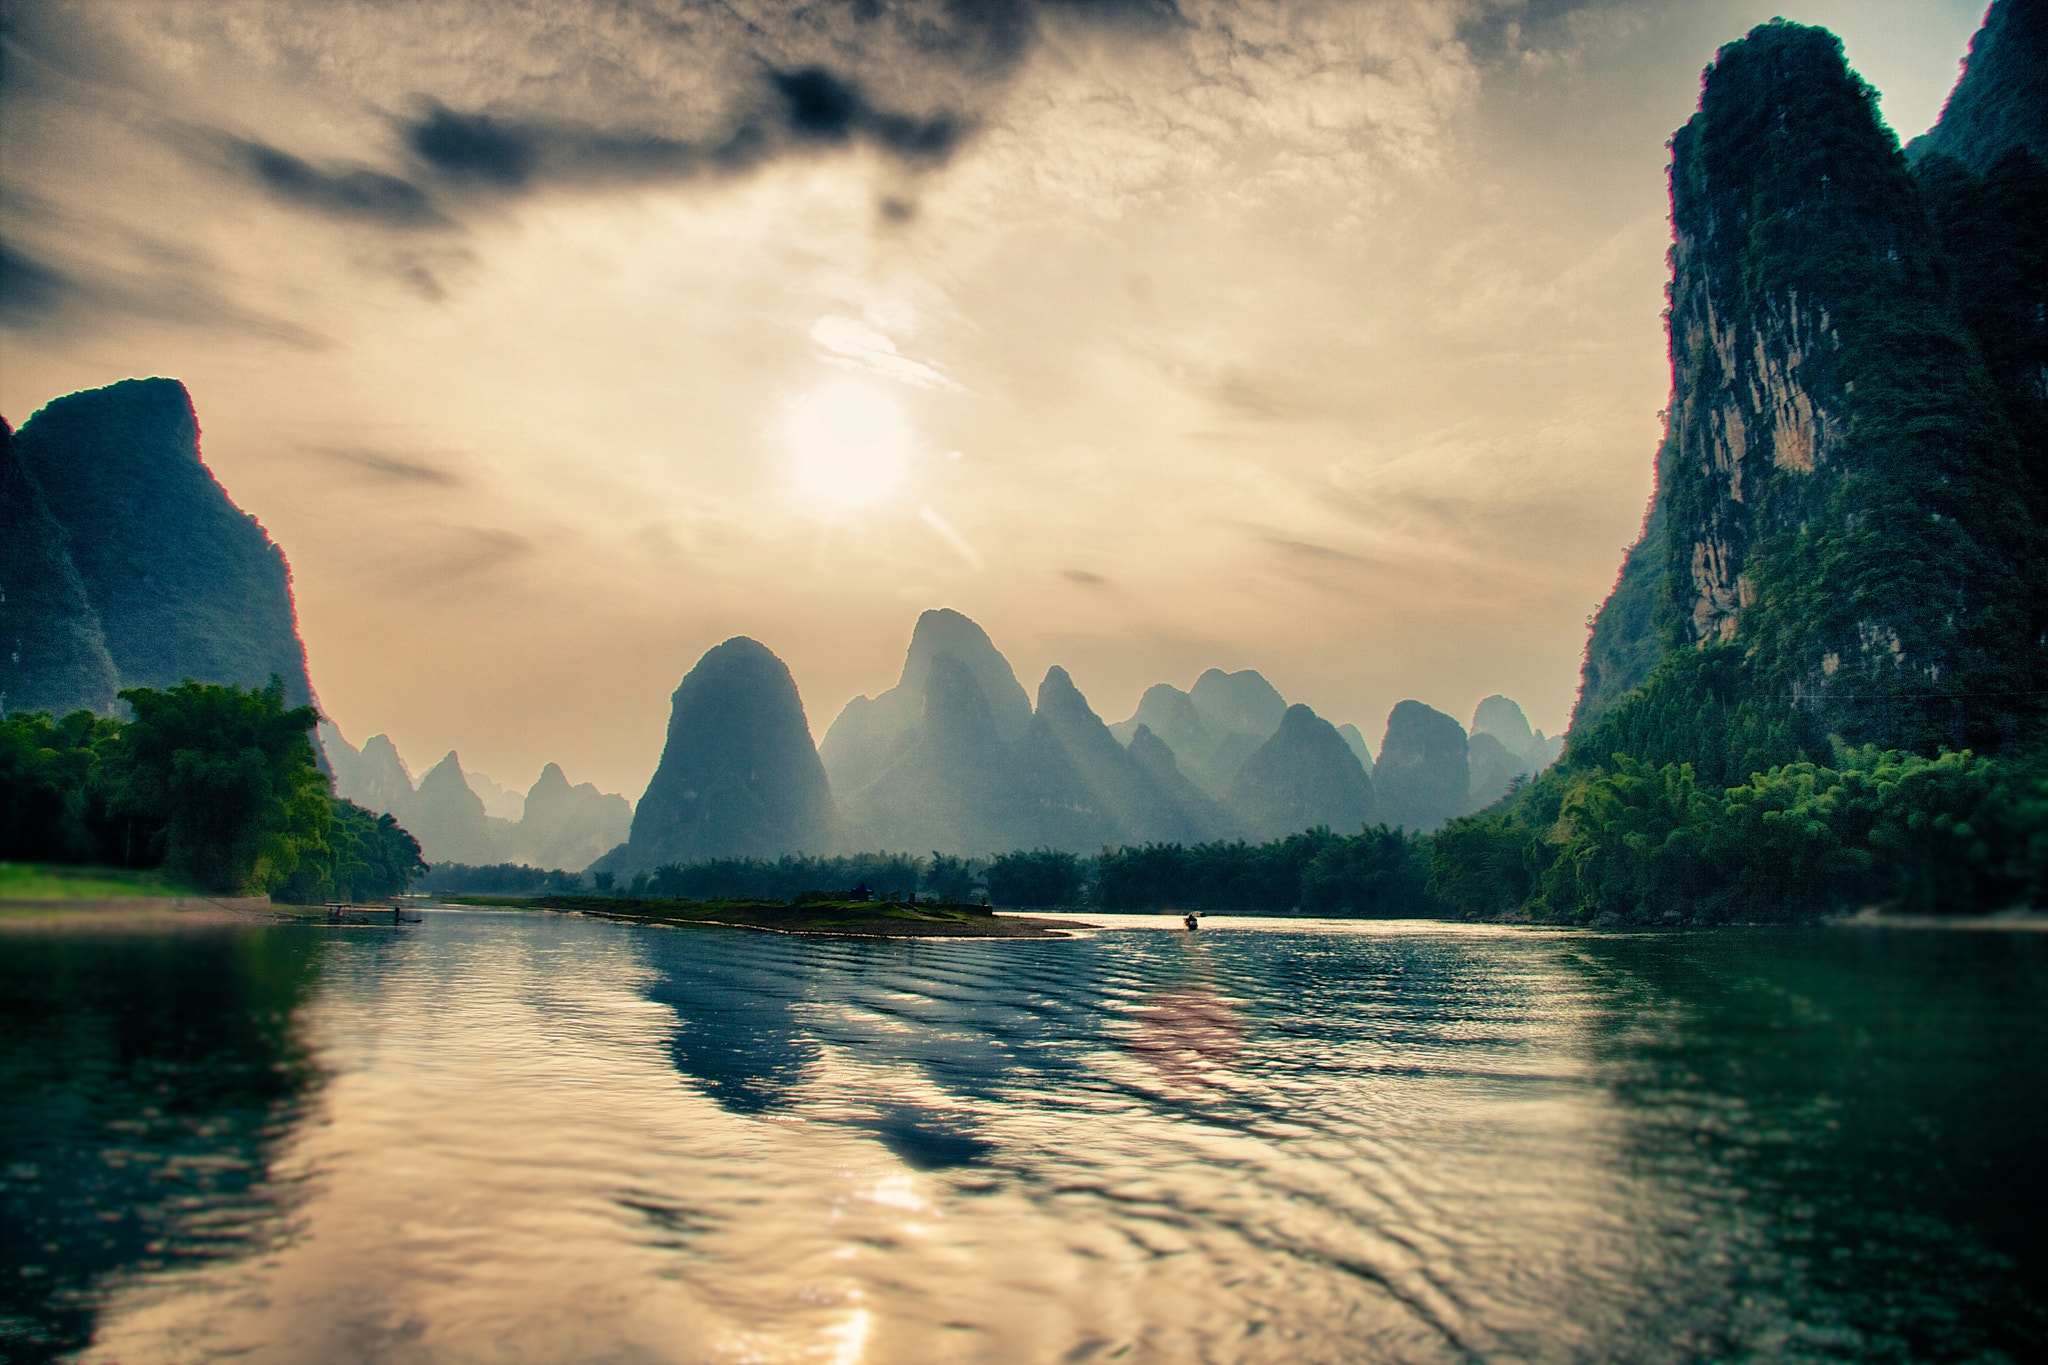 Guilin China Karst Limestone Hills by Anthony Maw / 500px